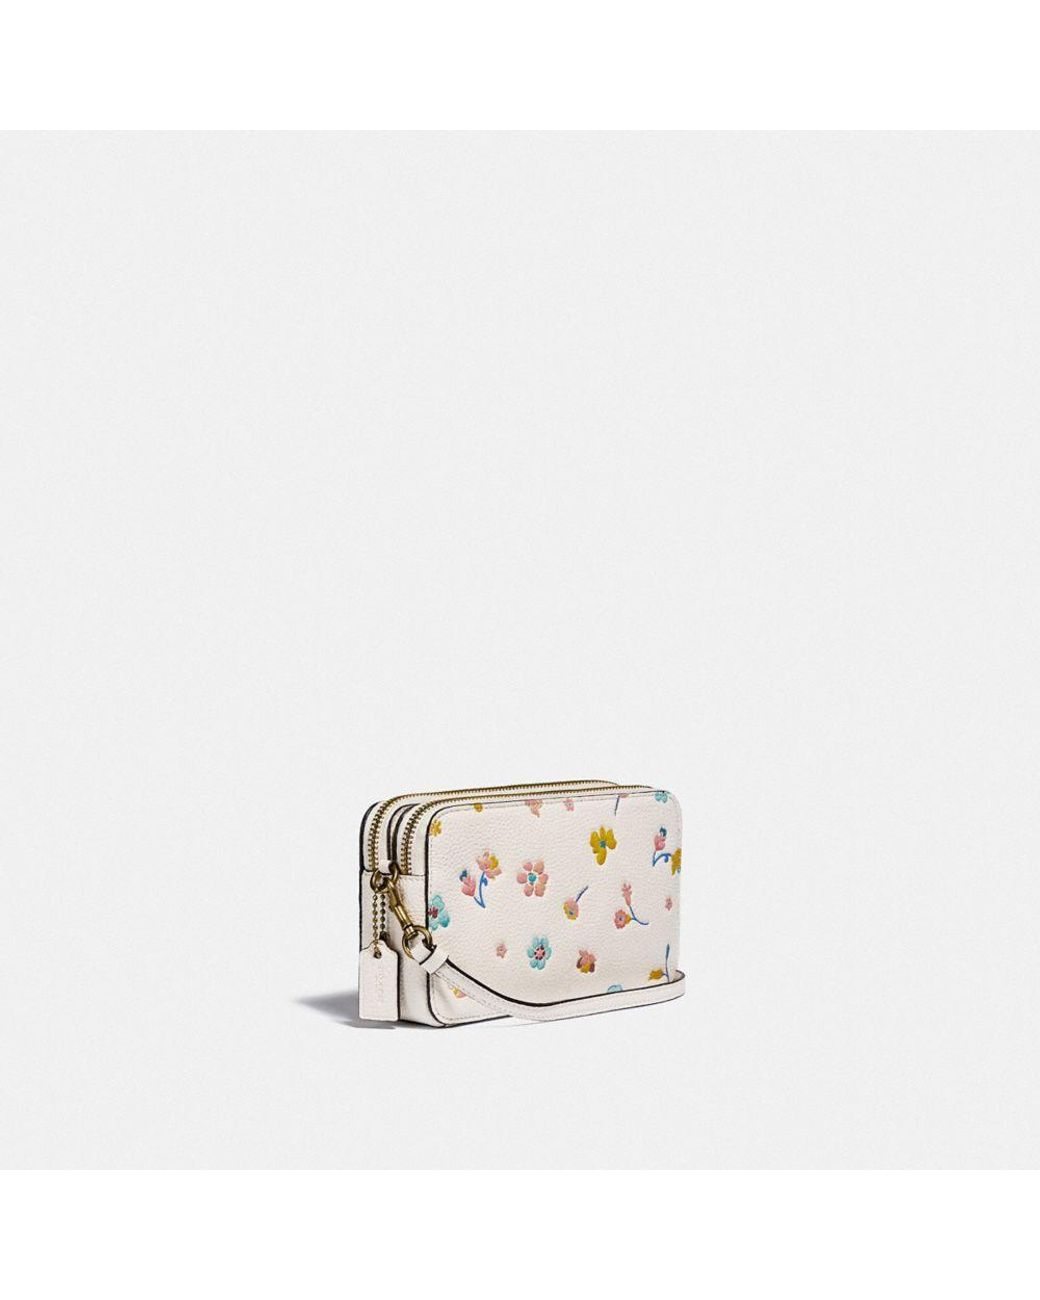 COACH Kira Crossbody With Watercolor Floral Print | Lyst